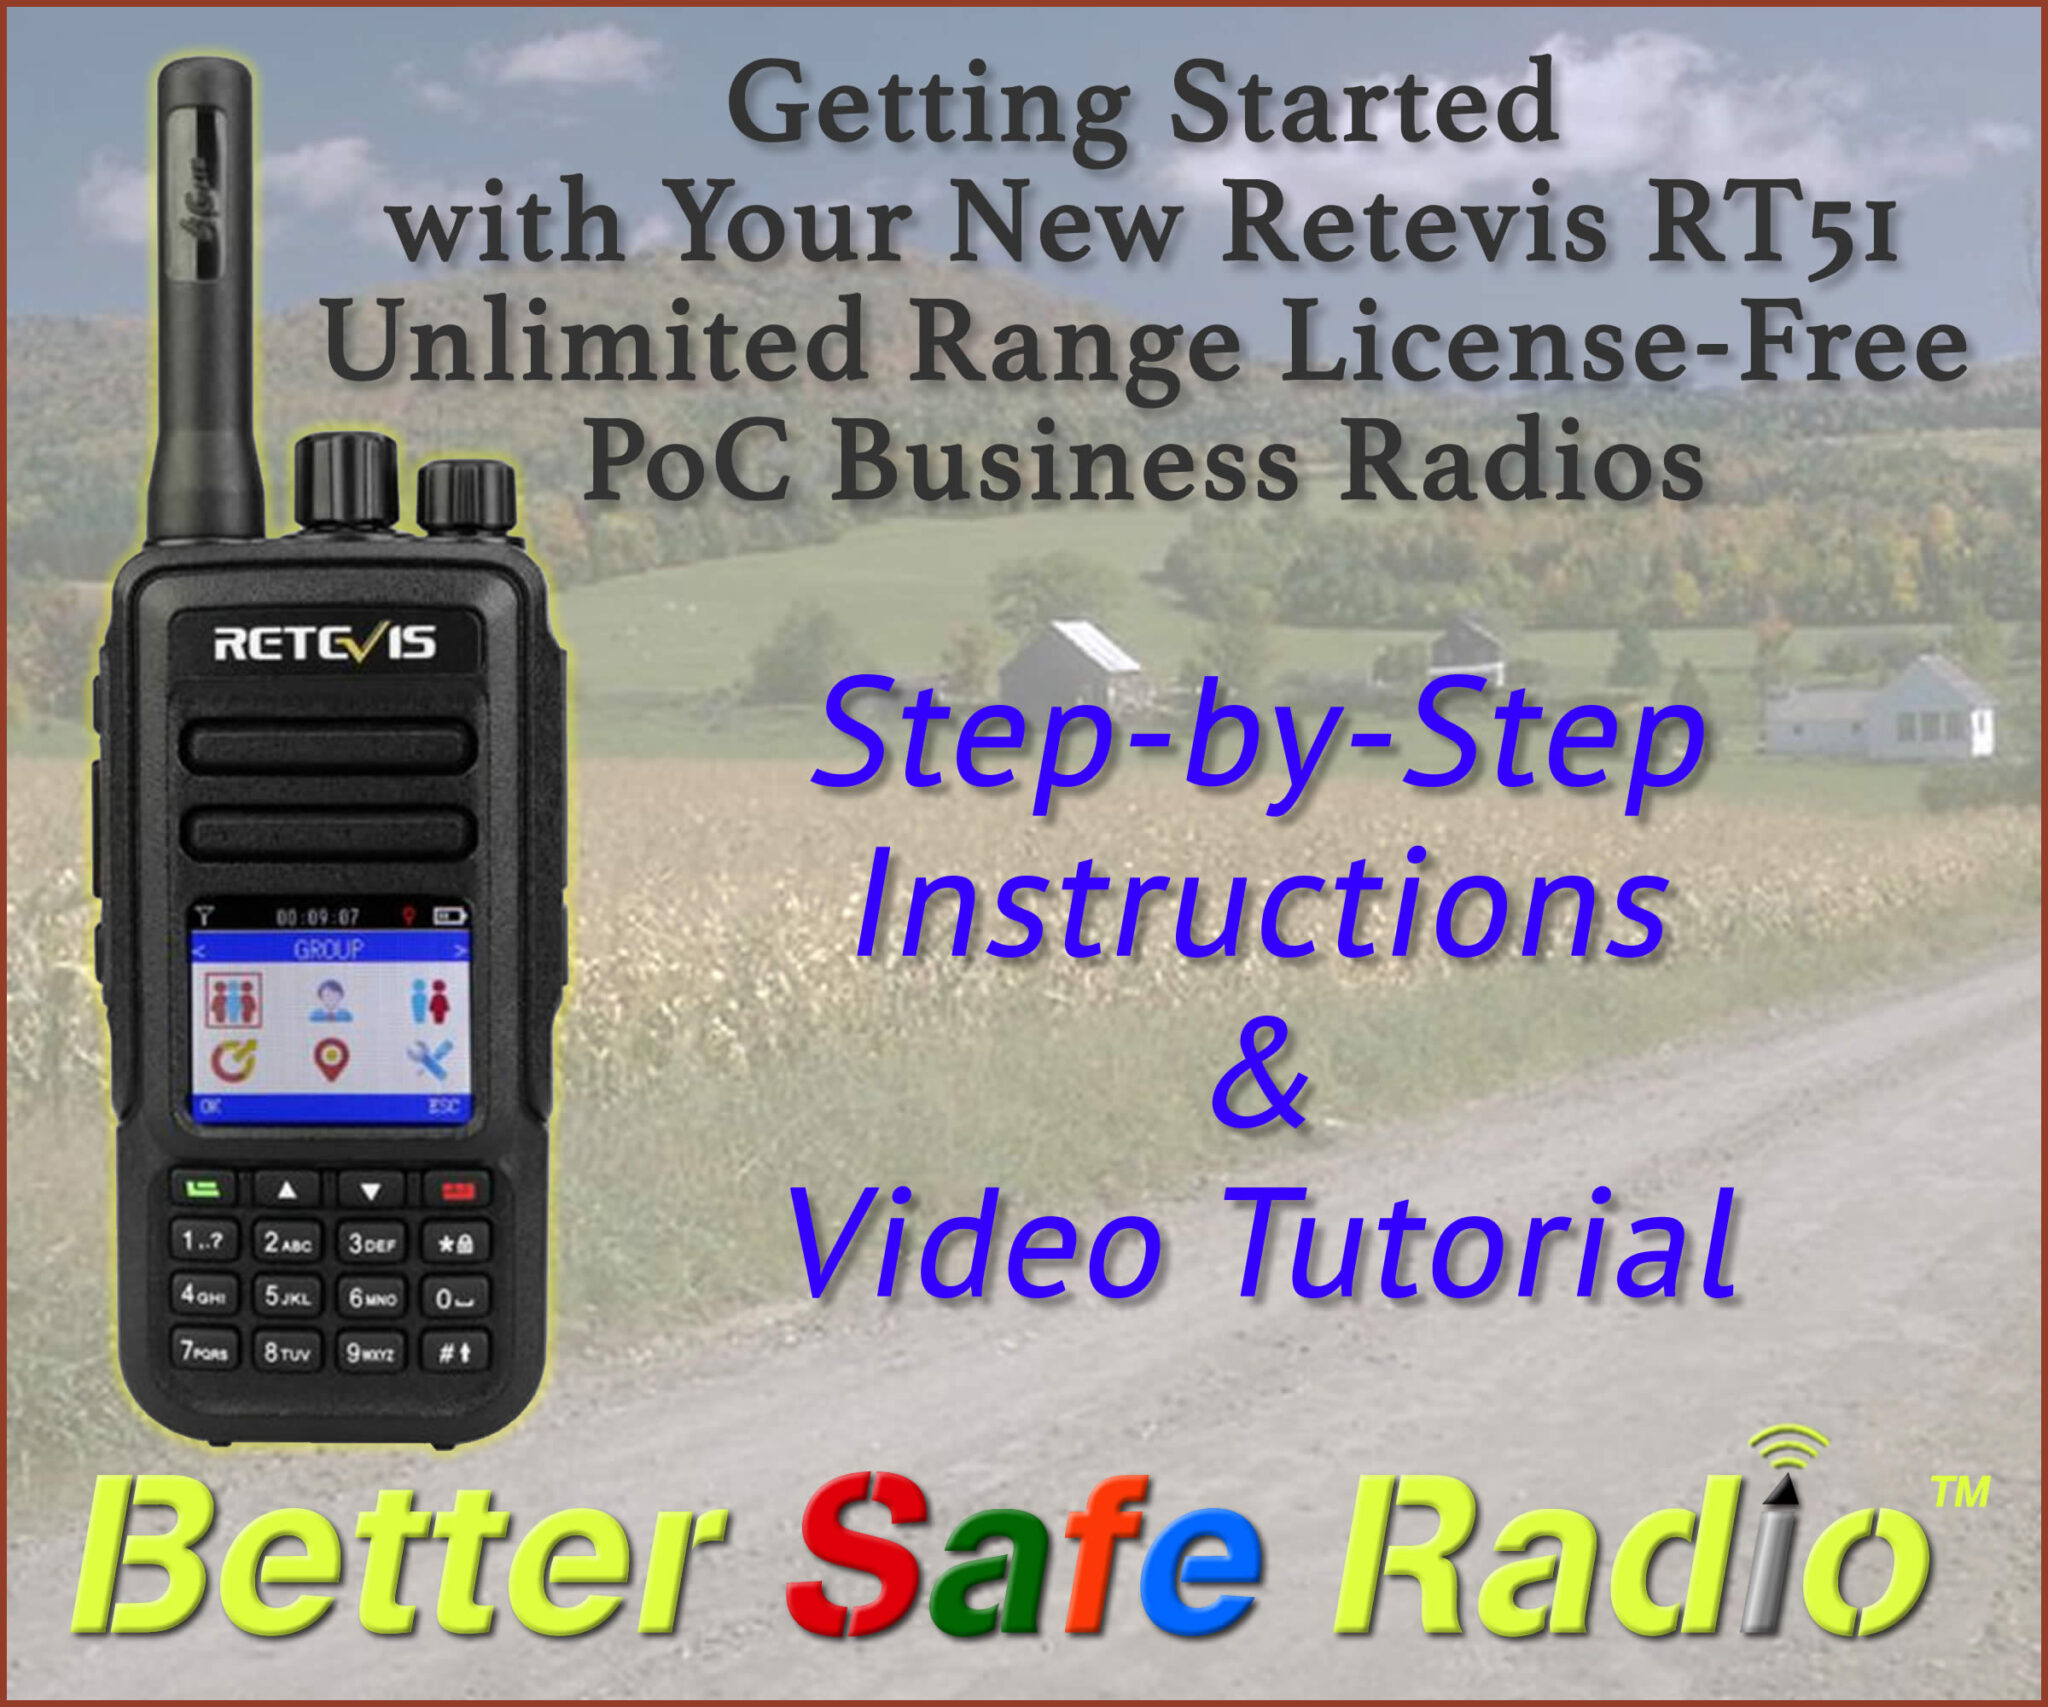 Getting Started with Your New Retevis RT51 Unlimited Range License-Free PoC Business Radios